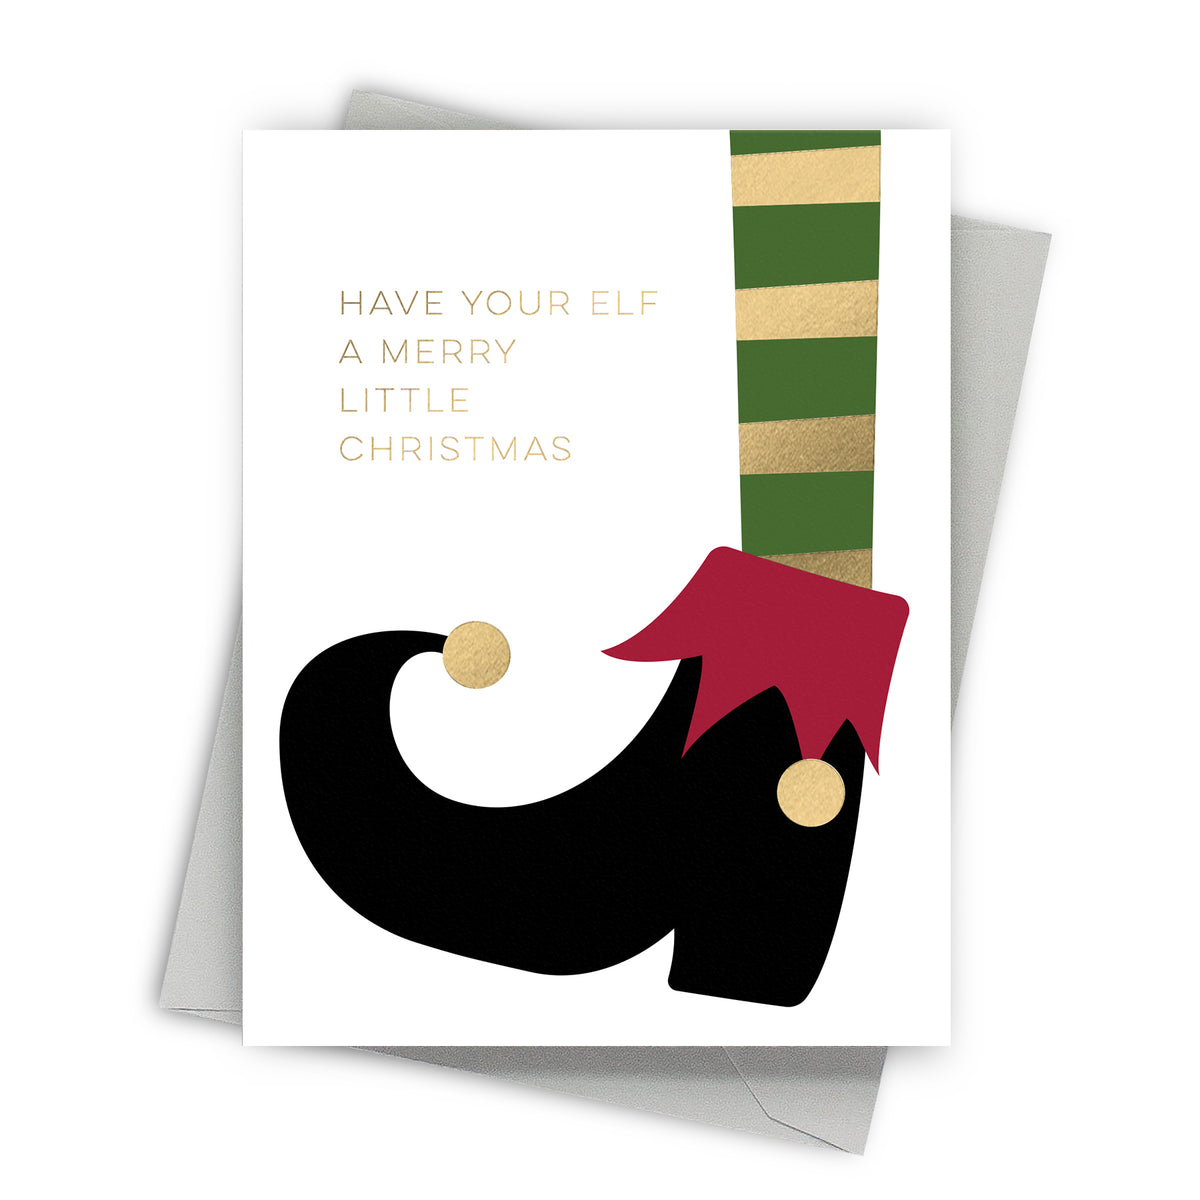 Merry Elf Christmas Cards by Fine Moments